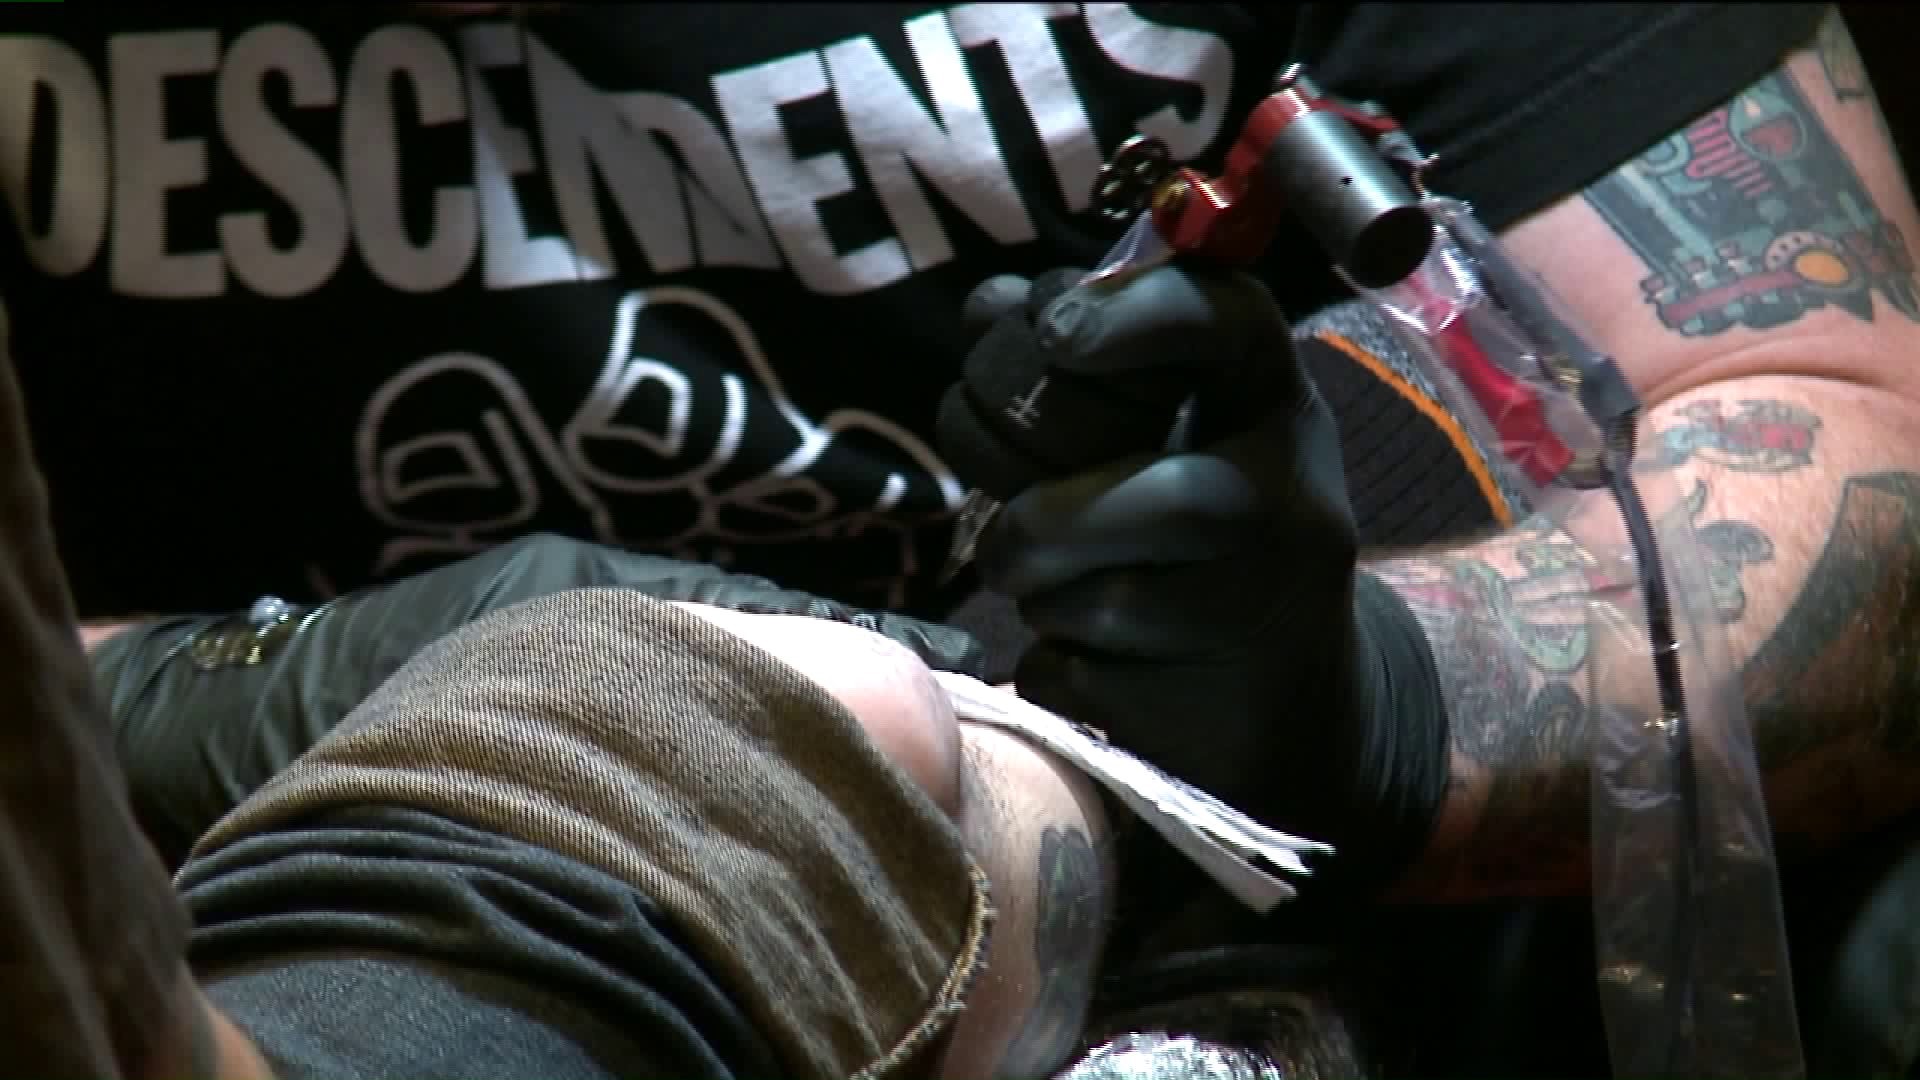 Annual Tattoo Convention Expected To Draw Thousands To Scranton For Three-Day Event